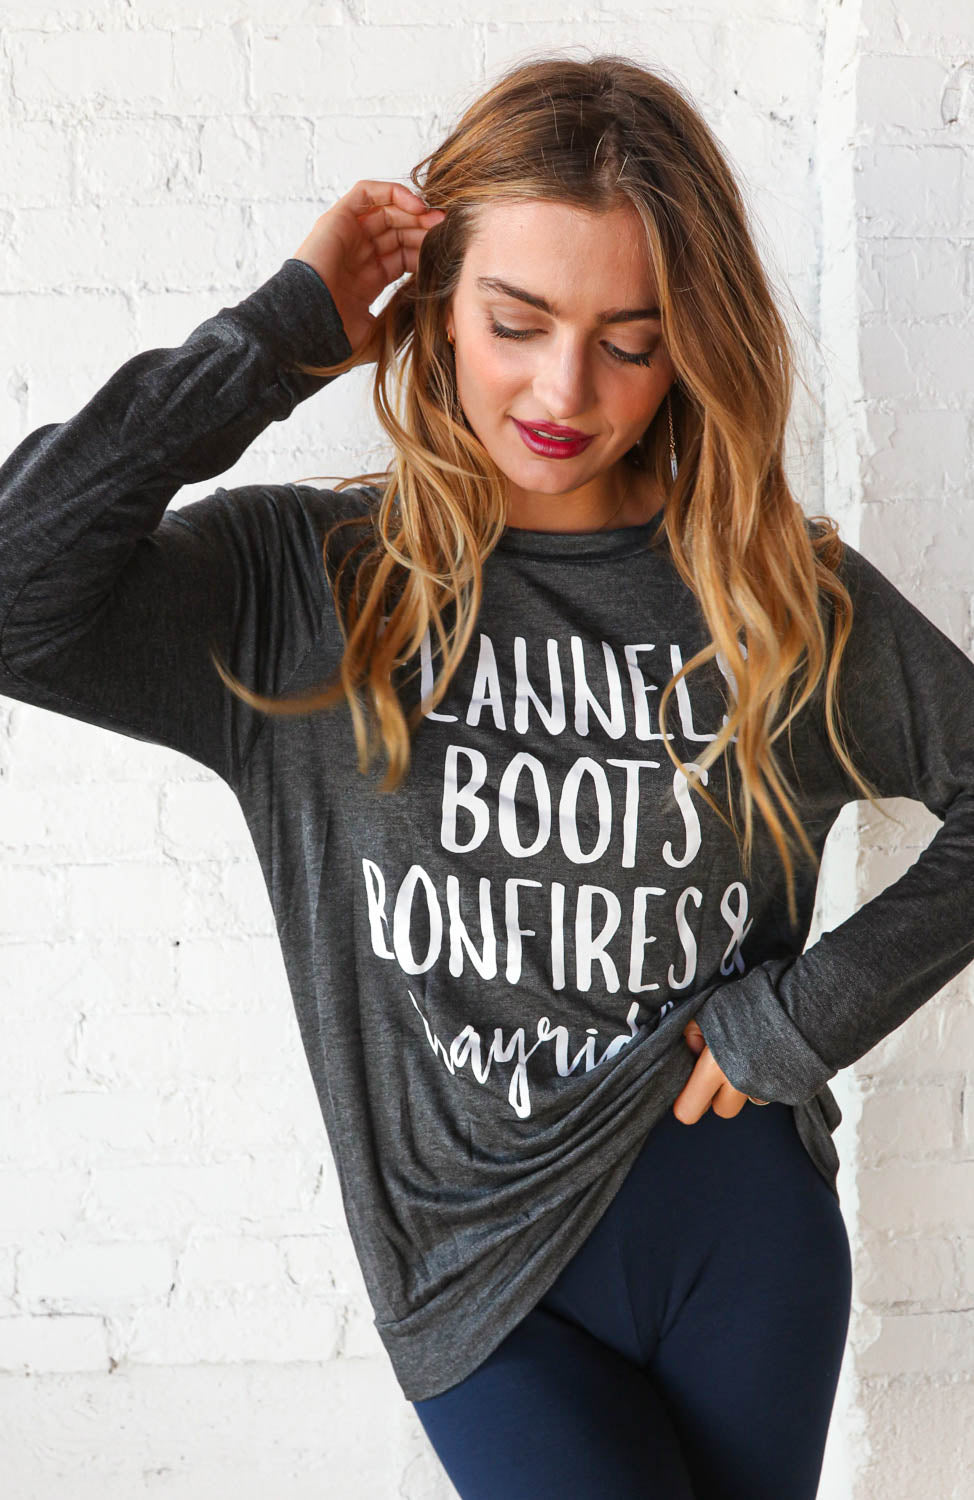 Flannel, Boots, Bonfires - Graphic Tee